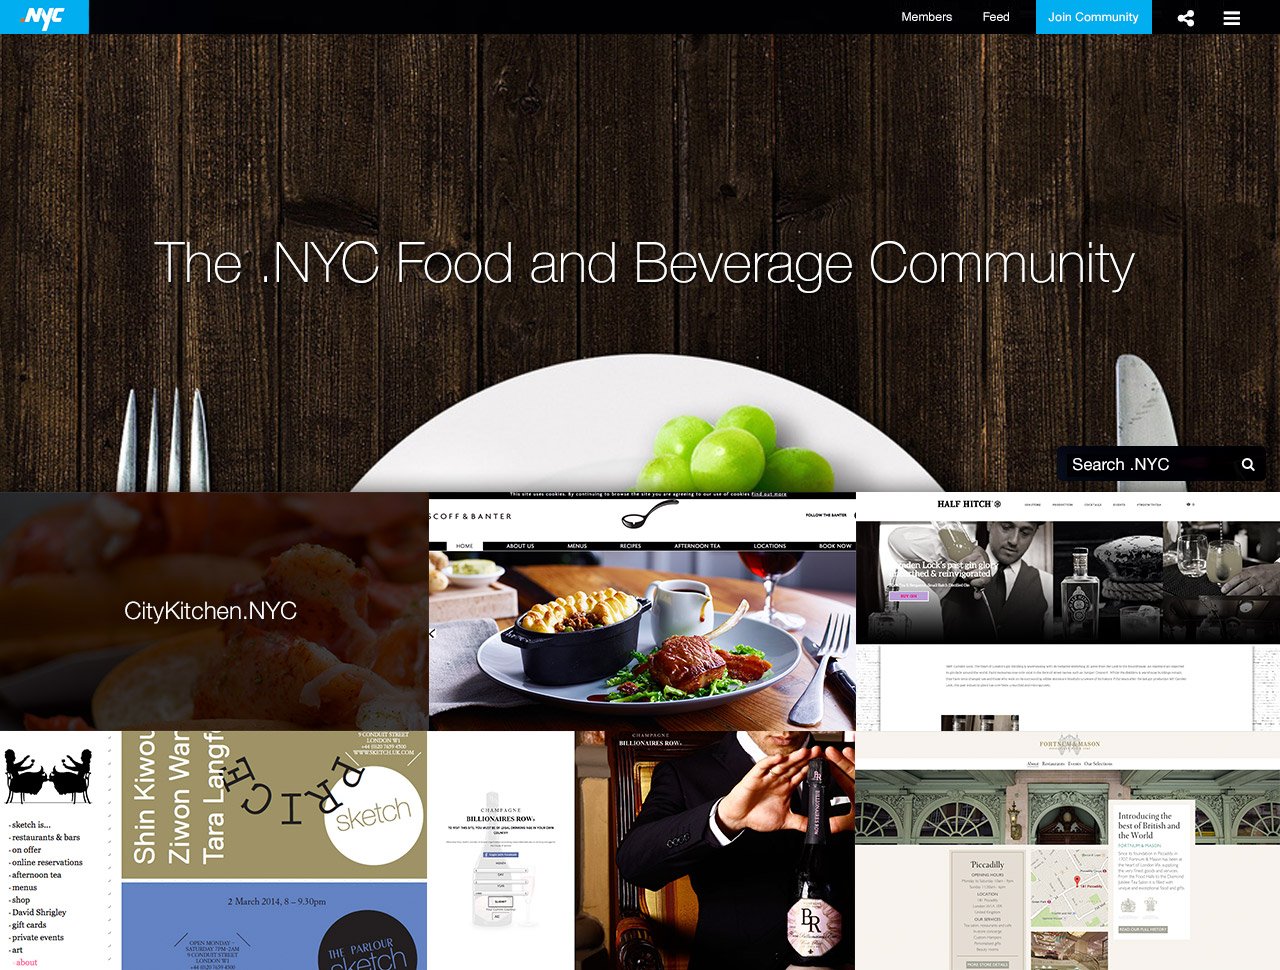 NYC Food and Beverage Community